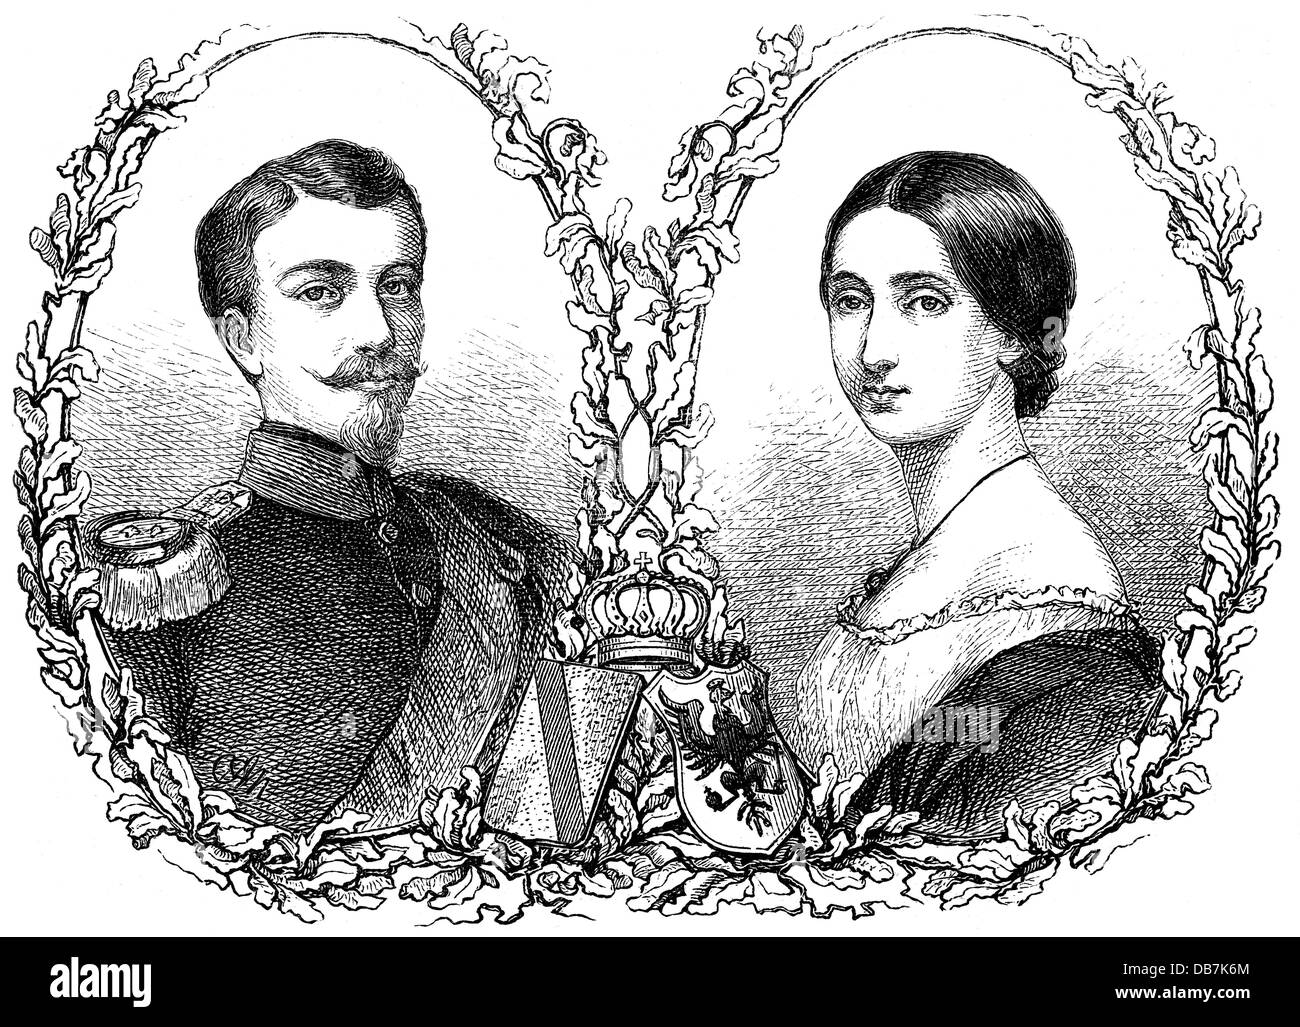 Frederick I, 9.9.1826 - 28.9.1907, Grand Duke of Baden 5.9.1856 - 28.9.1907, portrait, with wife Grand Duchess Louise, wood engraving, 1856, Stock Photo